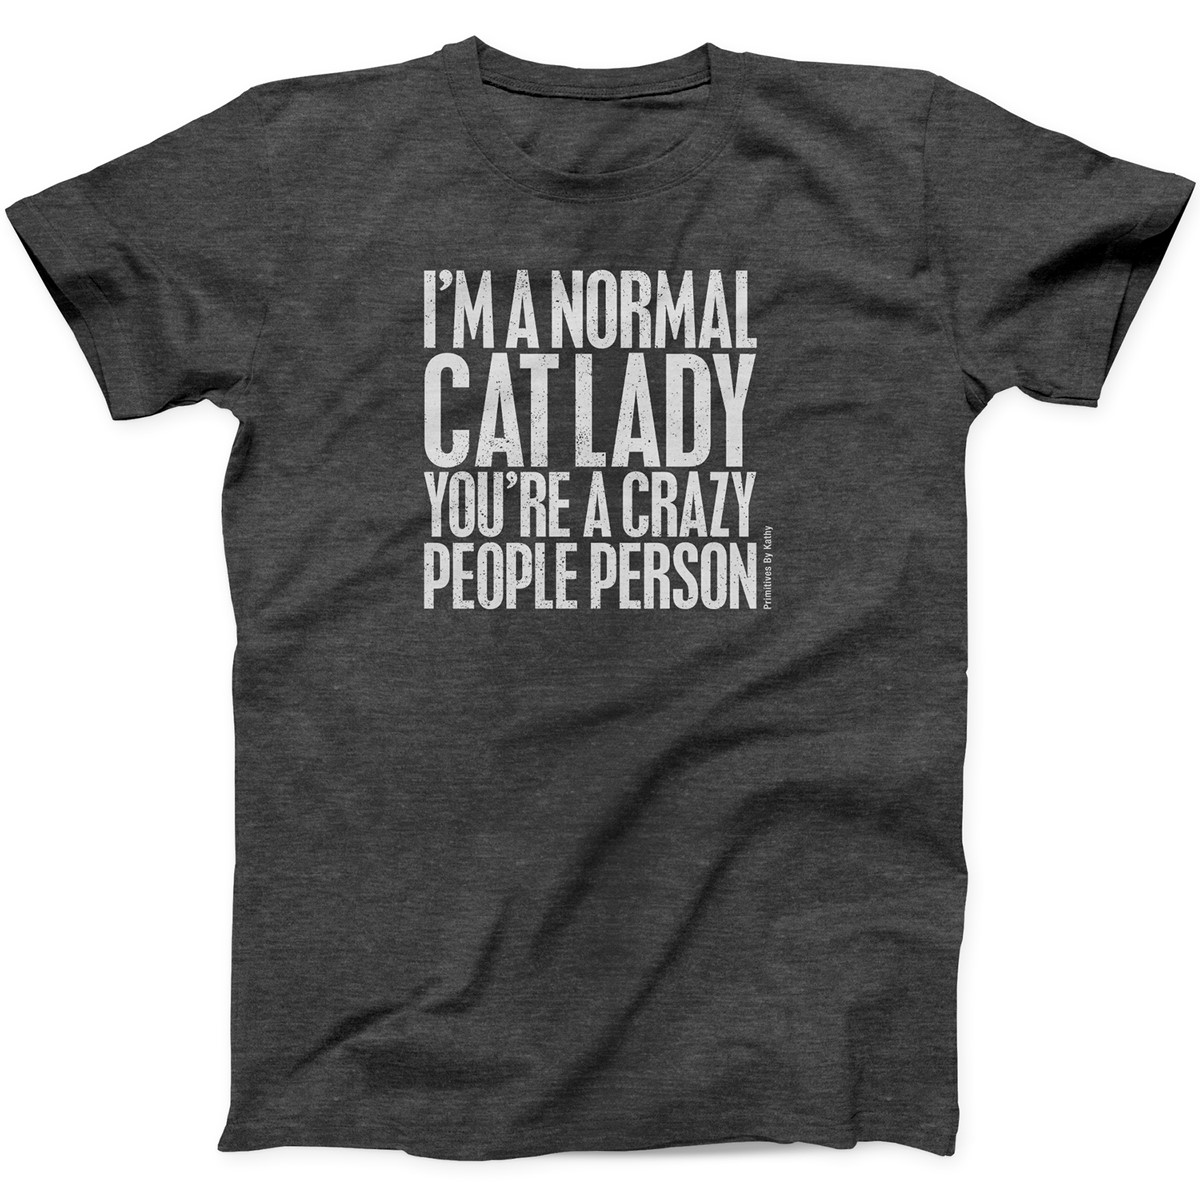 I'm A Normal Cat Lady 2XL T-Shirt - Polyester, Cotton